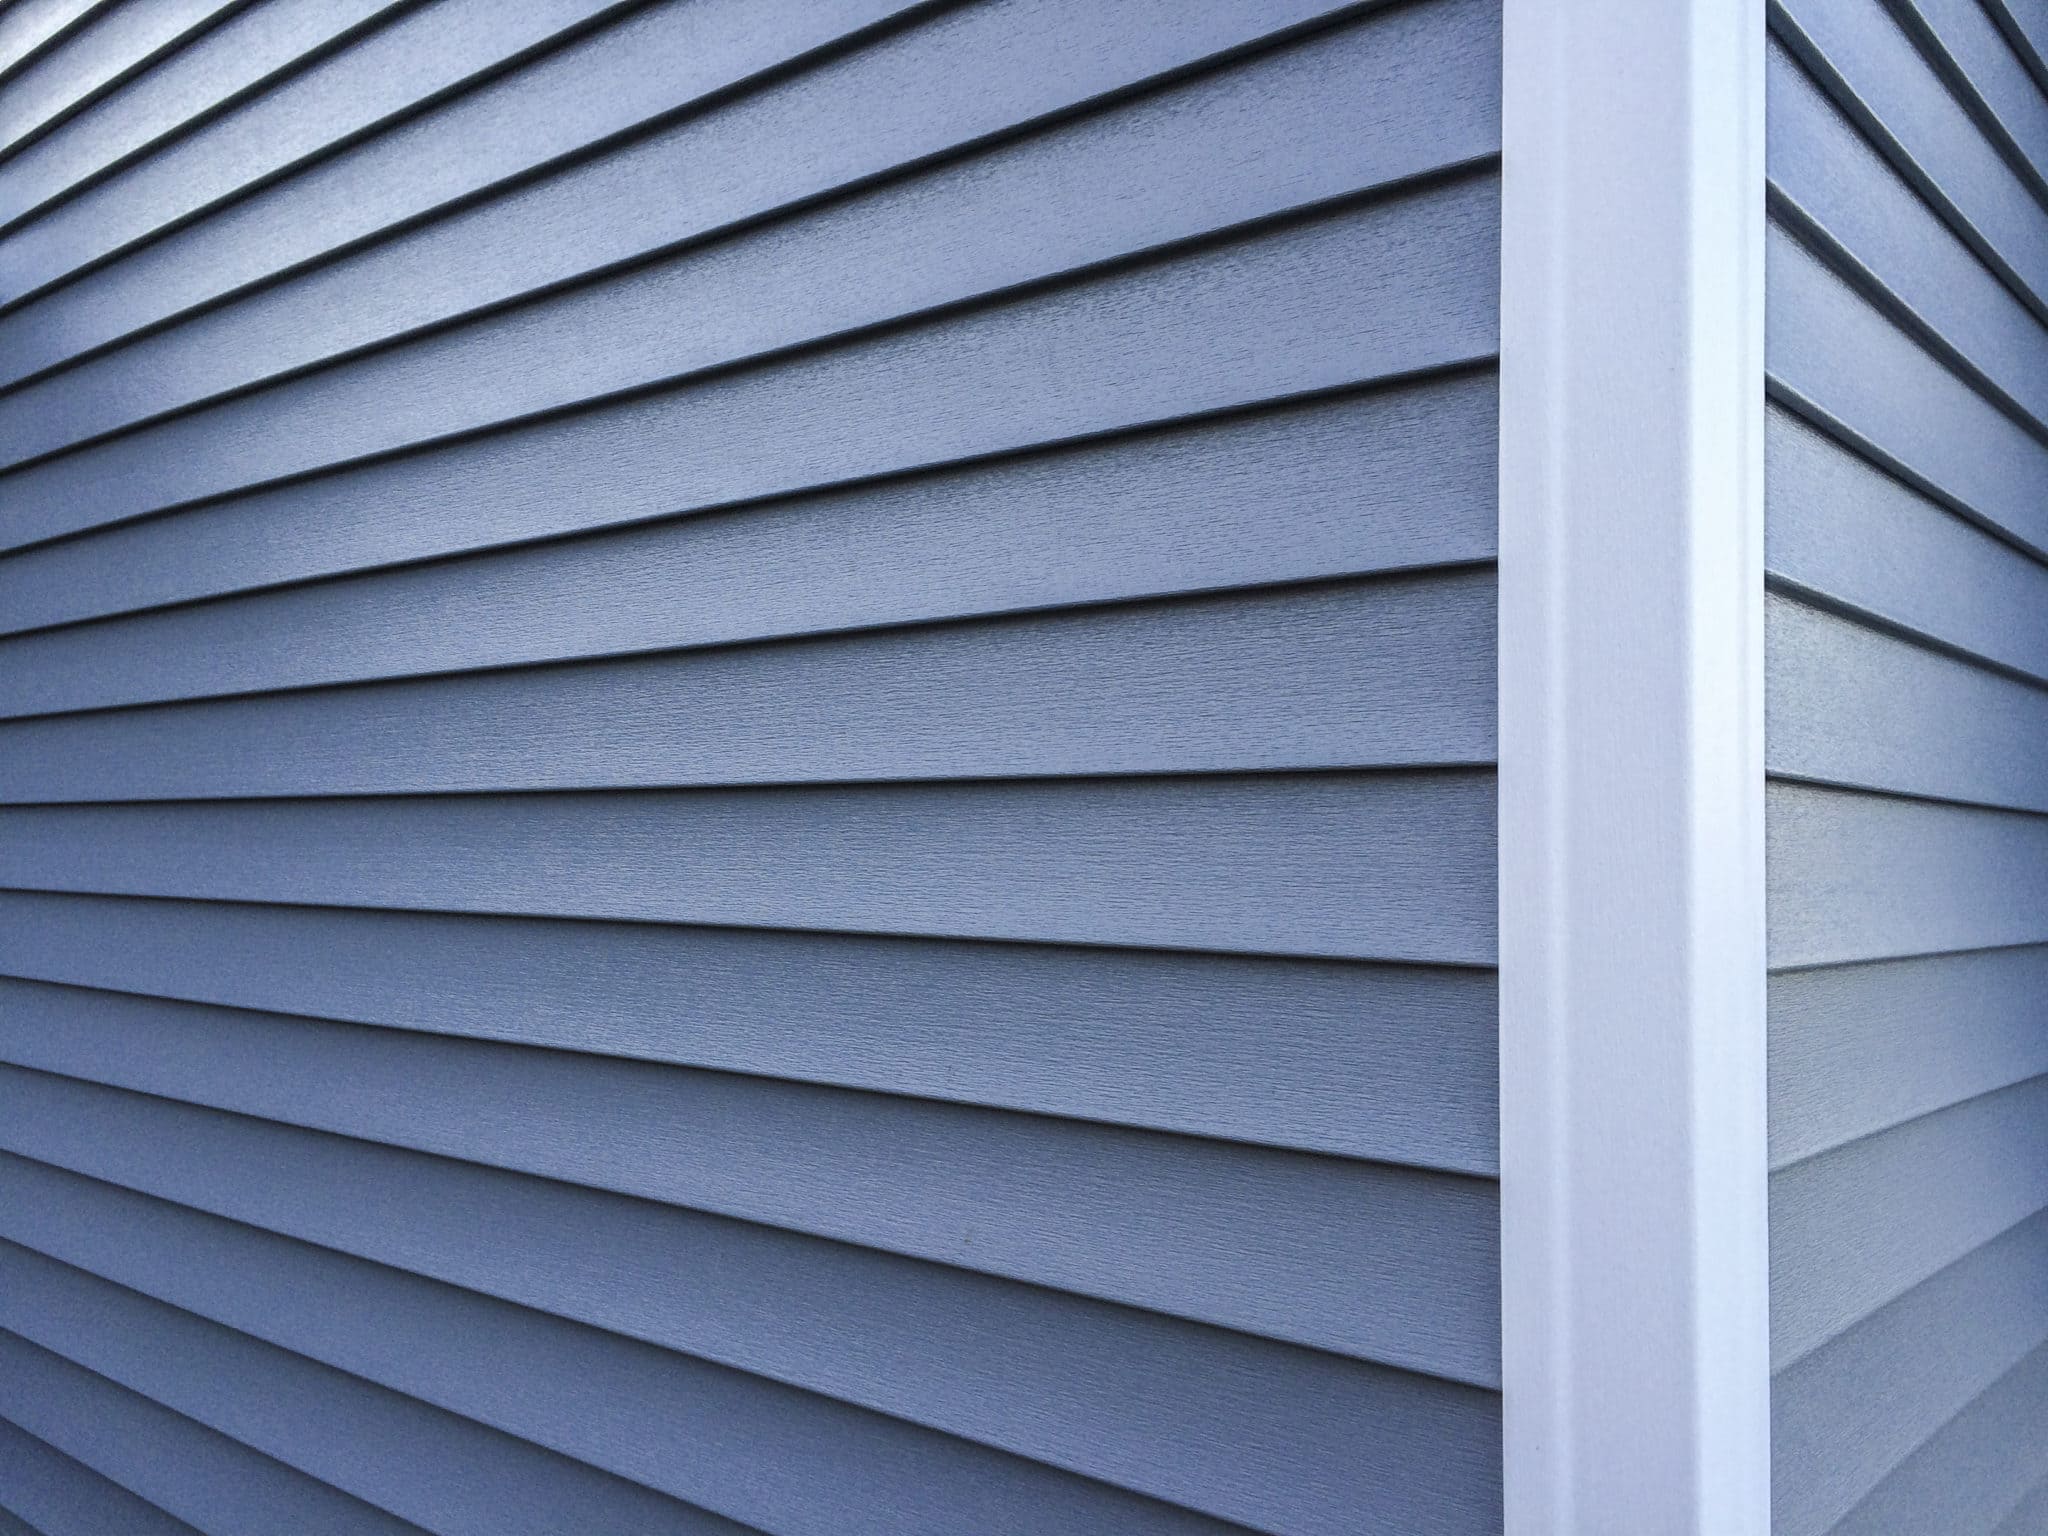 Close-up of a house corner showing blue-gray vinyl horizontal siding with a visible texture and shadow lines. A white corner post creates a crisp edge, highlighting the clean lines and durable construction of the siding material.